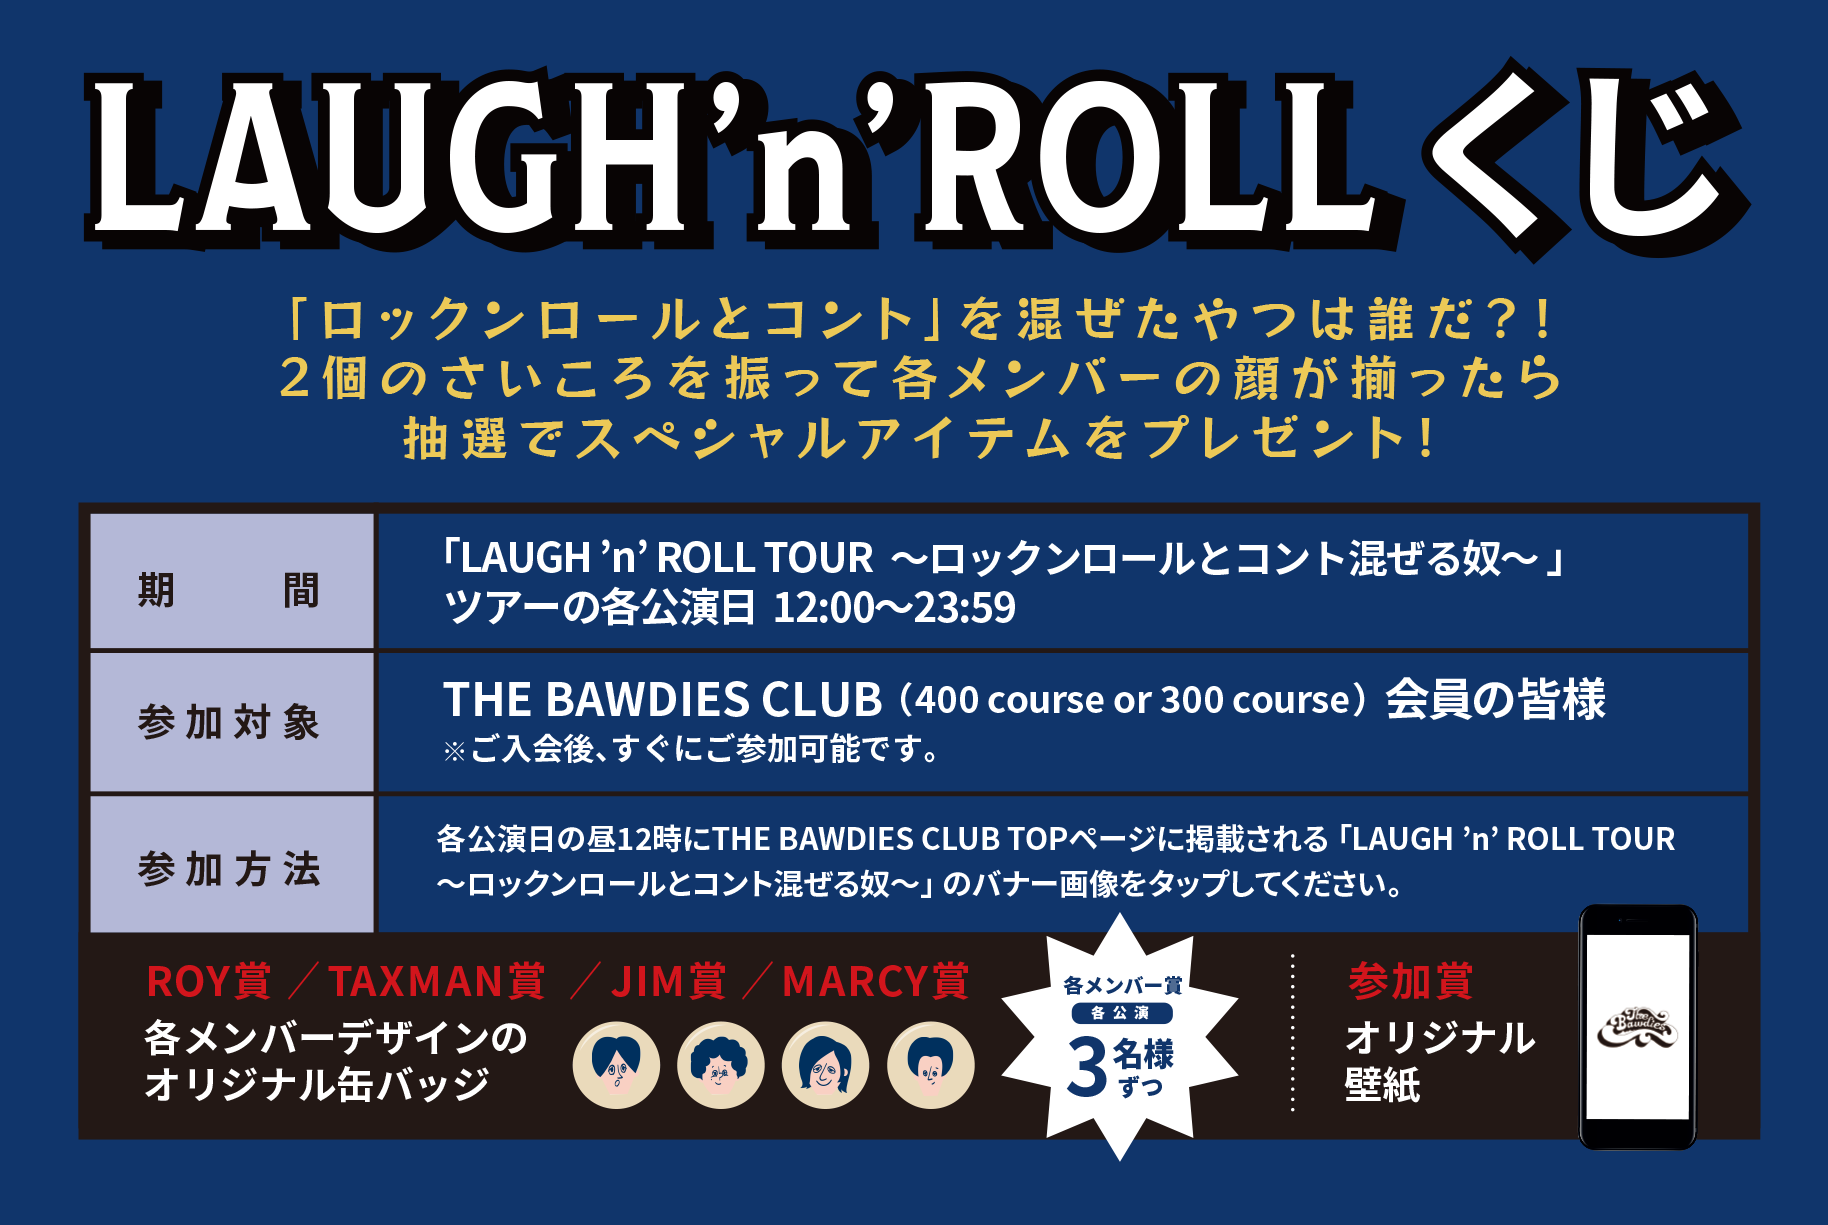 「LAUGH ’n’ ROLL TOUR ～ロックンロールとコント混ぜる奴～」公演日限定！<br />THE BAWDIES CLUB全会員対象「LAUGH ’n’ ROLLくじ」開催決定！